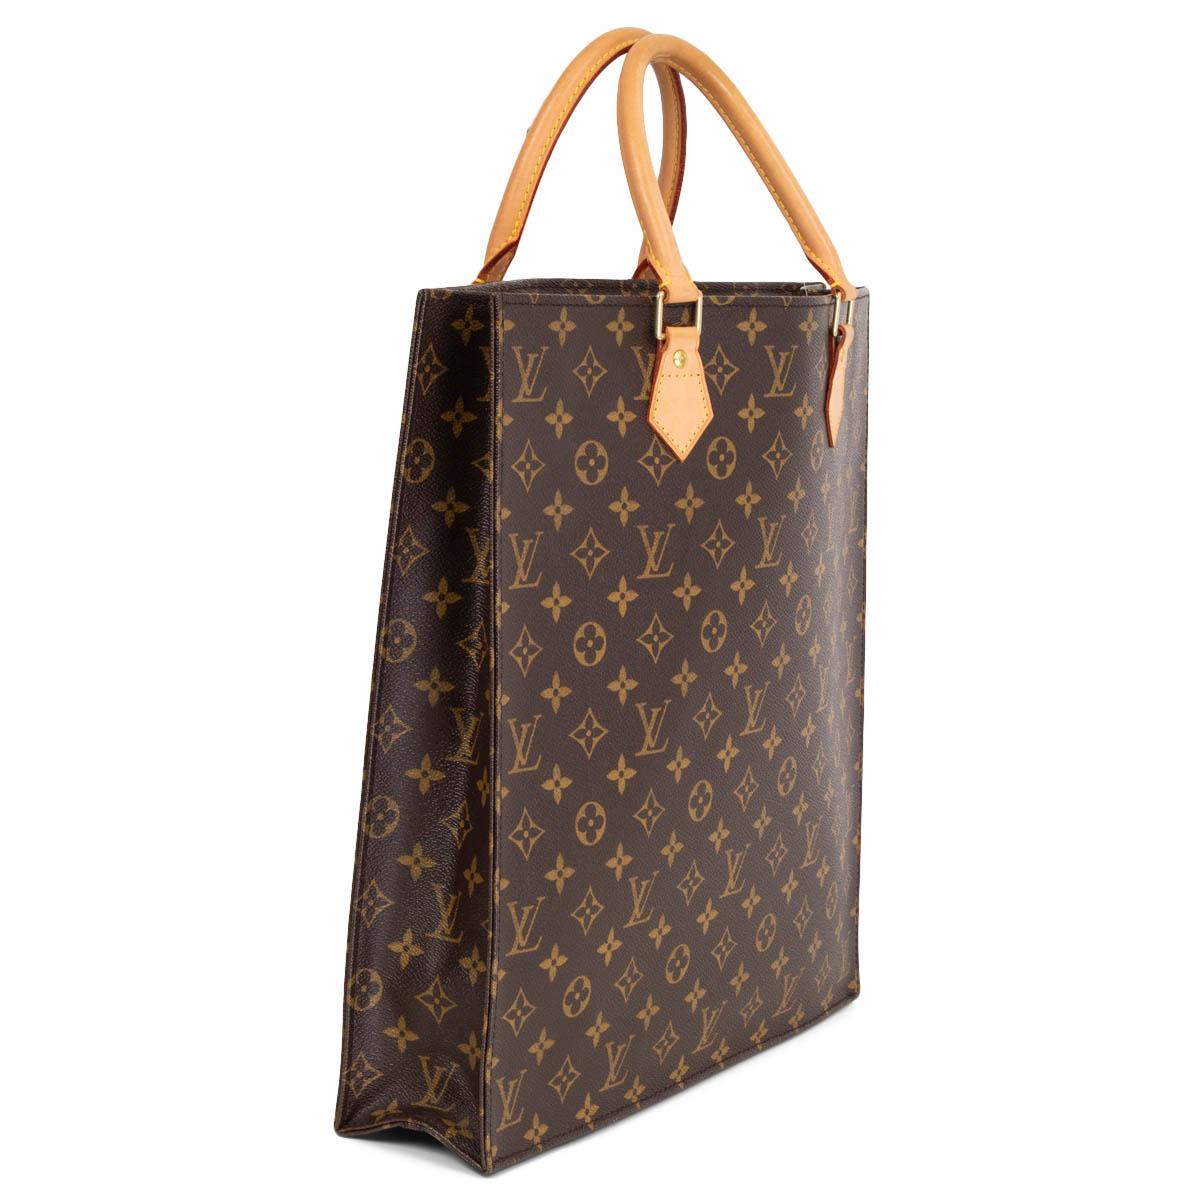 100% authentic Louis Vuitton Sac Plat GM in brown and olive Monogram Canvas with Vachetta cowhide leather handles. Lined in beige coated canvas with two patch pockets against the back. Has been carried once or twice and is in virtually new